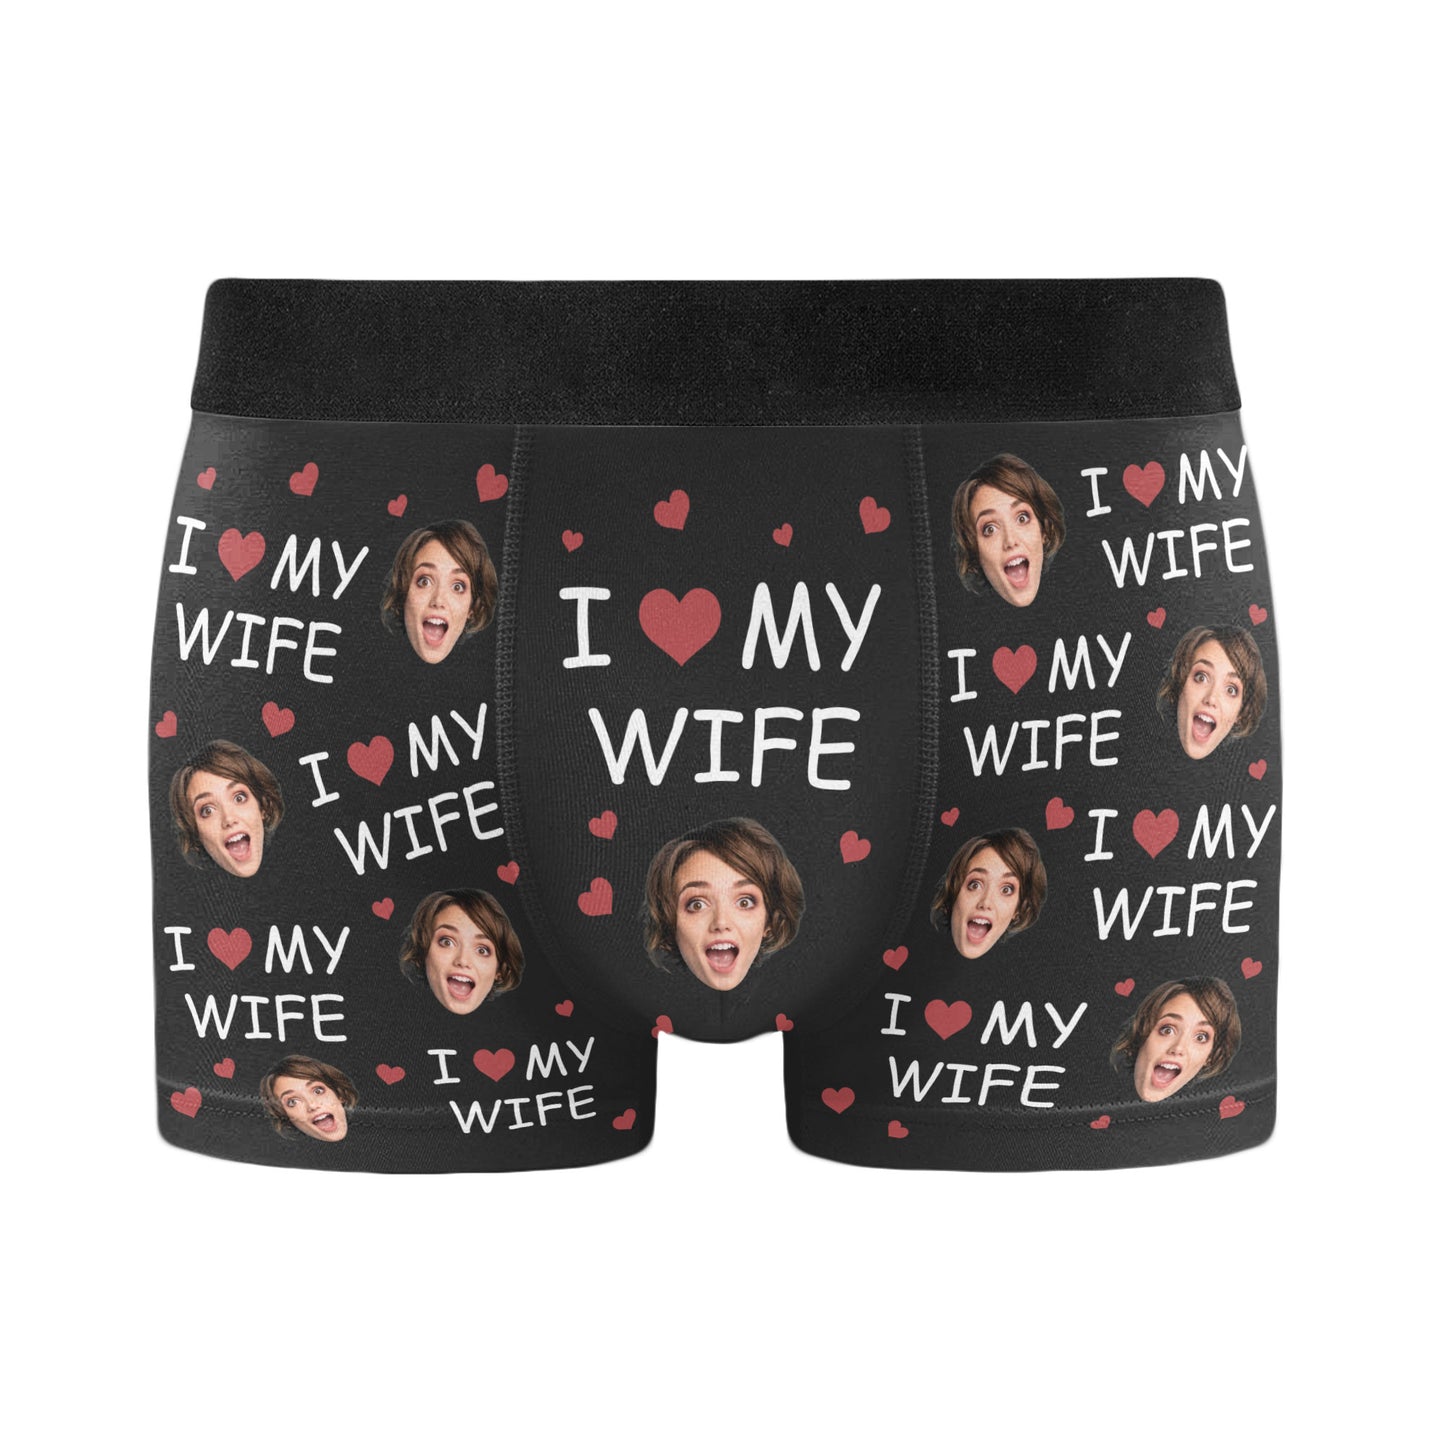 https://macorner.co/cdn/shop/products/I-Love-My-Wife-Personalized-Mens-Boxer-Briefs-ValentineS-Day-Loving-Birthday-Gift-For-Boyfriend-Husband-Life-Partners1.jpg?v=1673326011&width=1445